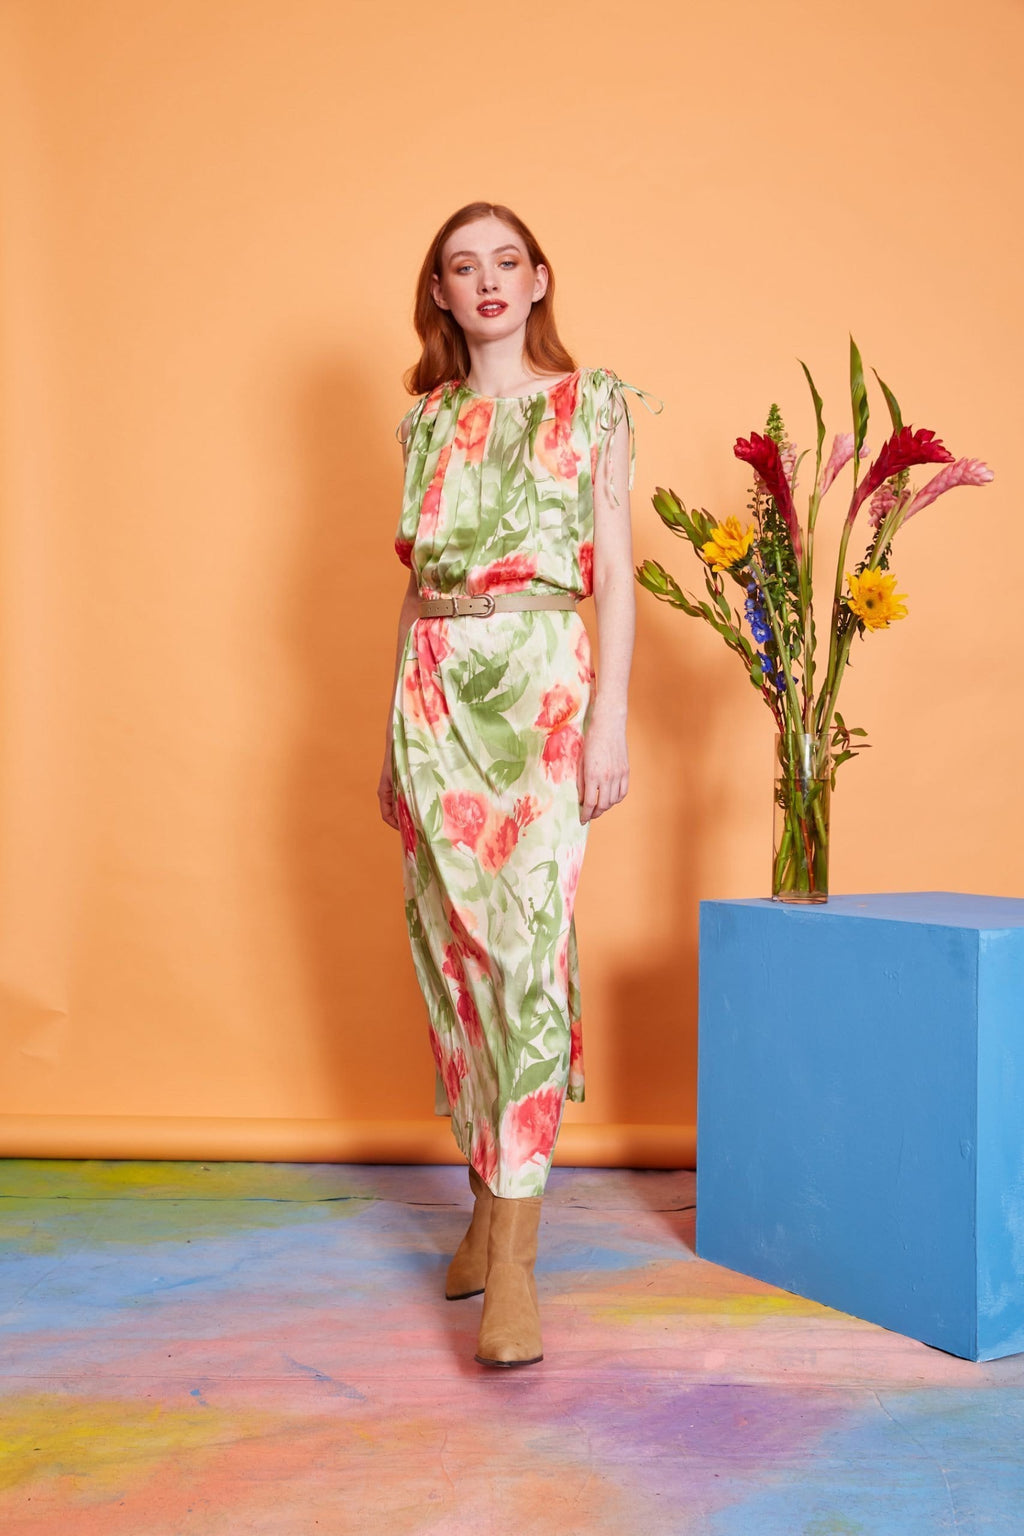 Lavanya Coodly Apparel & Accessories > Clothing > Dresses XS / Orange/Green Lavanya Coodly Jessica Floral Midi Dress in Orange & Green on Almond Silk with Bateau Neckline & Cap Sleeves